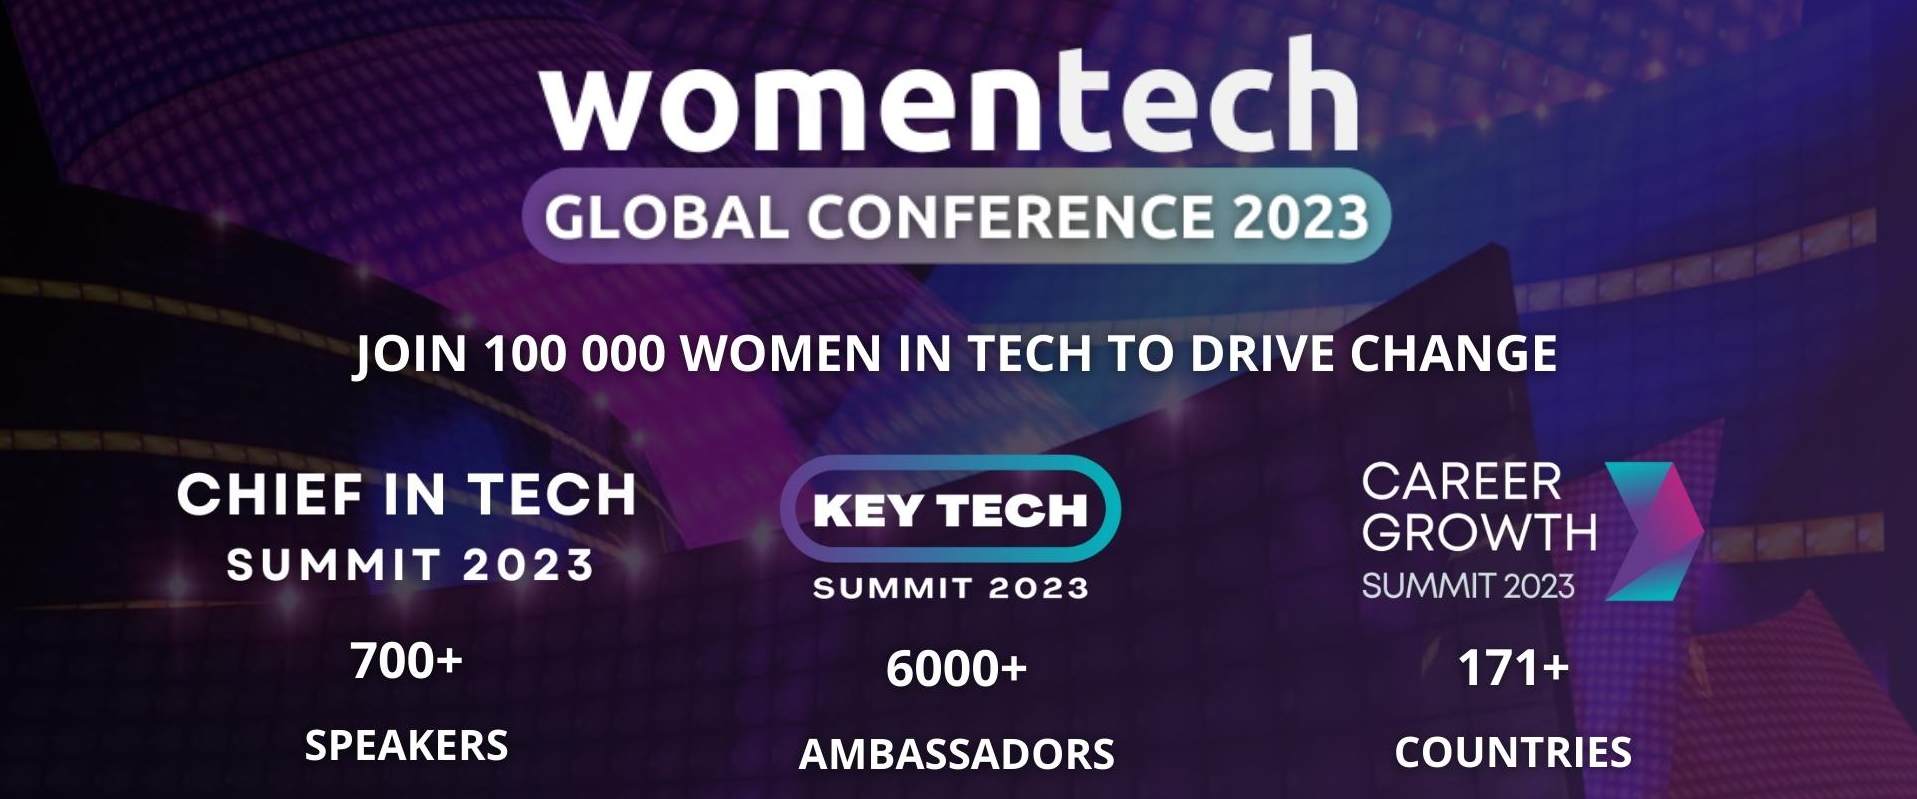 Women in Tech Global Conference 2023. A space for women in technology